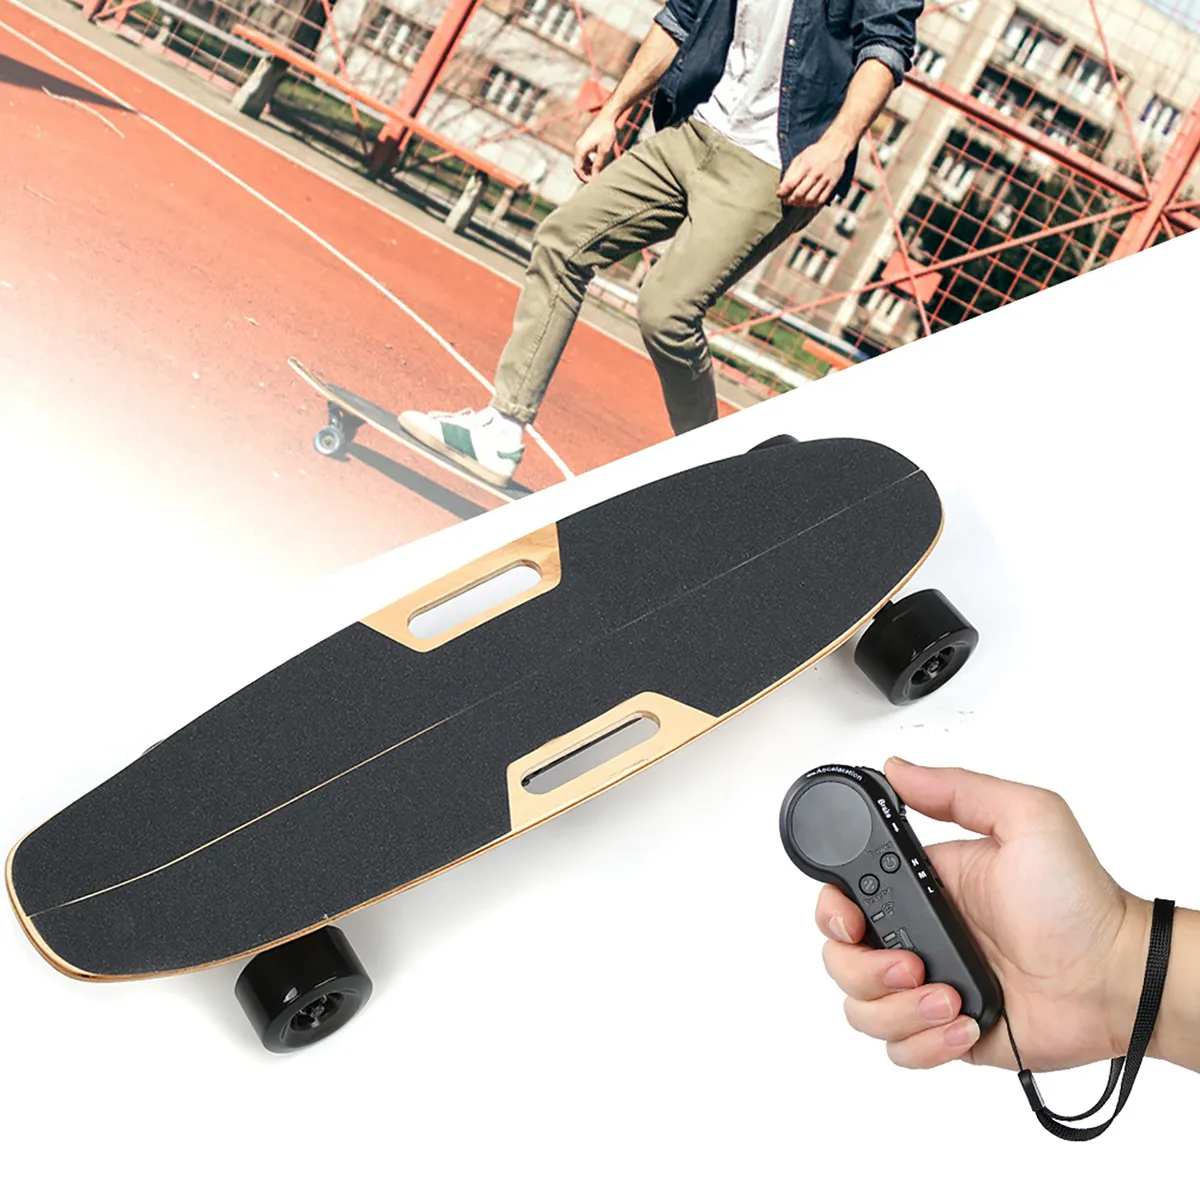 what-is-the-frequency-of-the-emad-electric-skateboard-controler